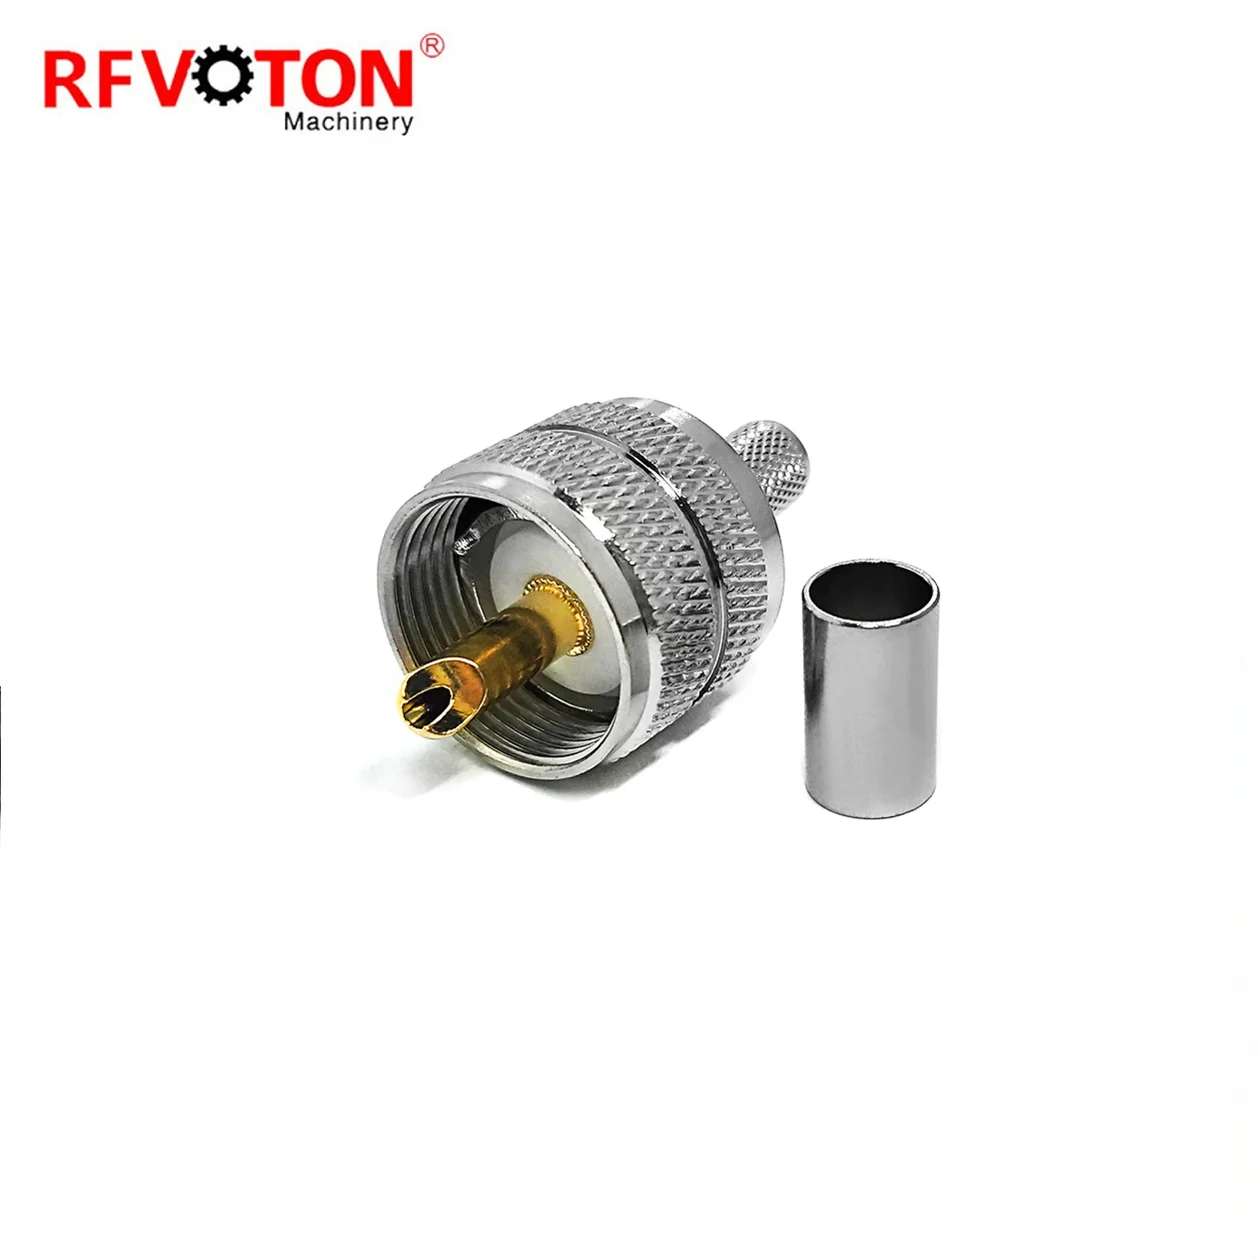 Factory supply Low price UHF male plug straight PL259 crimp lmr240 cable rf coaxial connectors  Converter